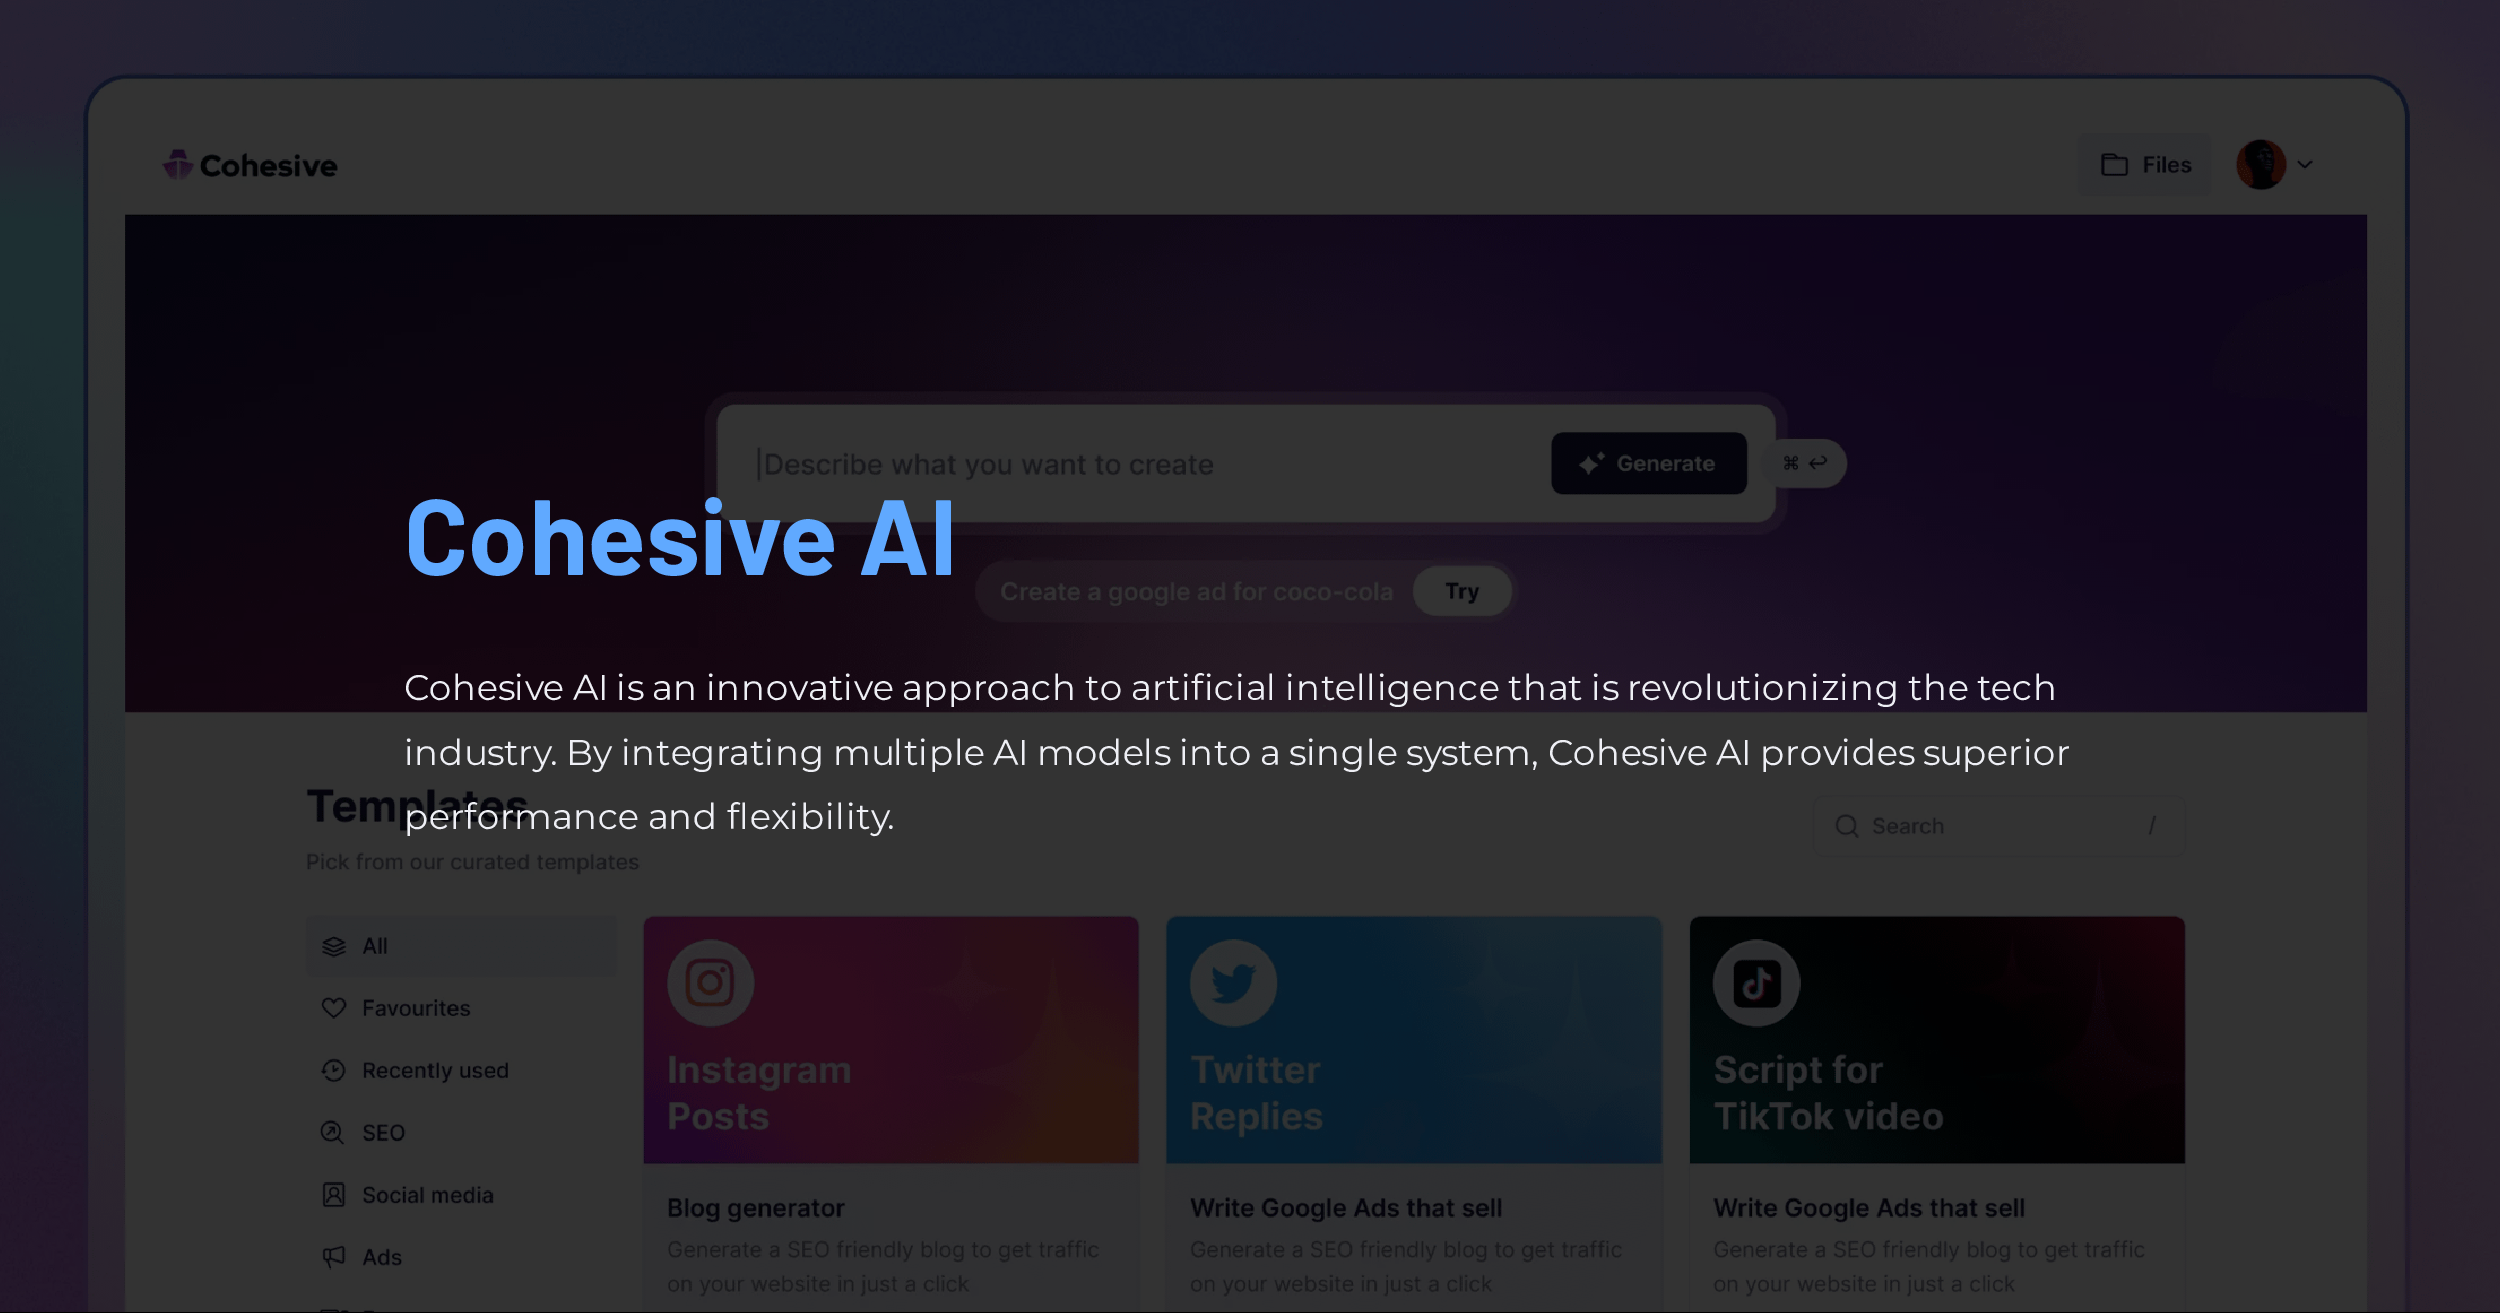 Cohesive AI leading the technological revolution with a unified AI system model.